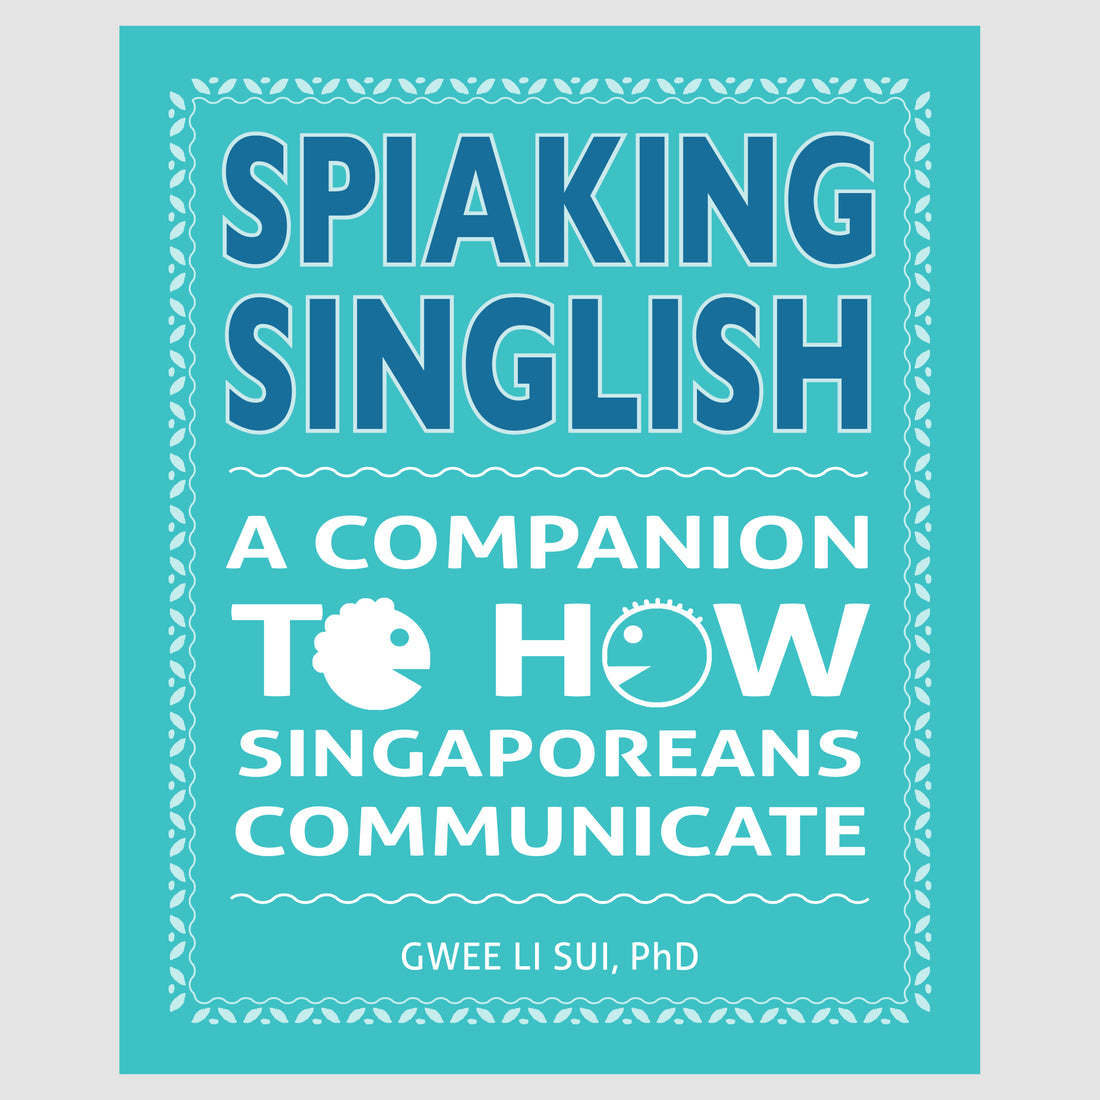 Spiaking Singlish: A Companion to how Singaporeans Communicate